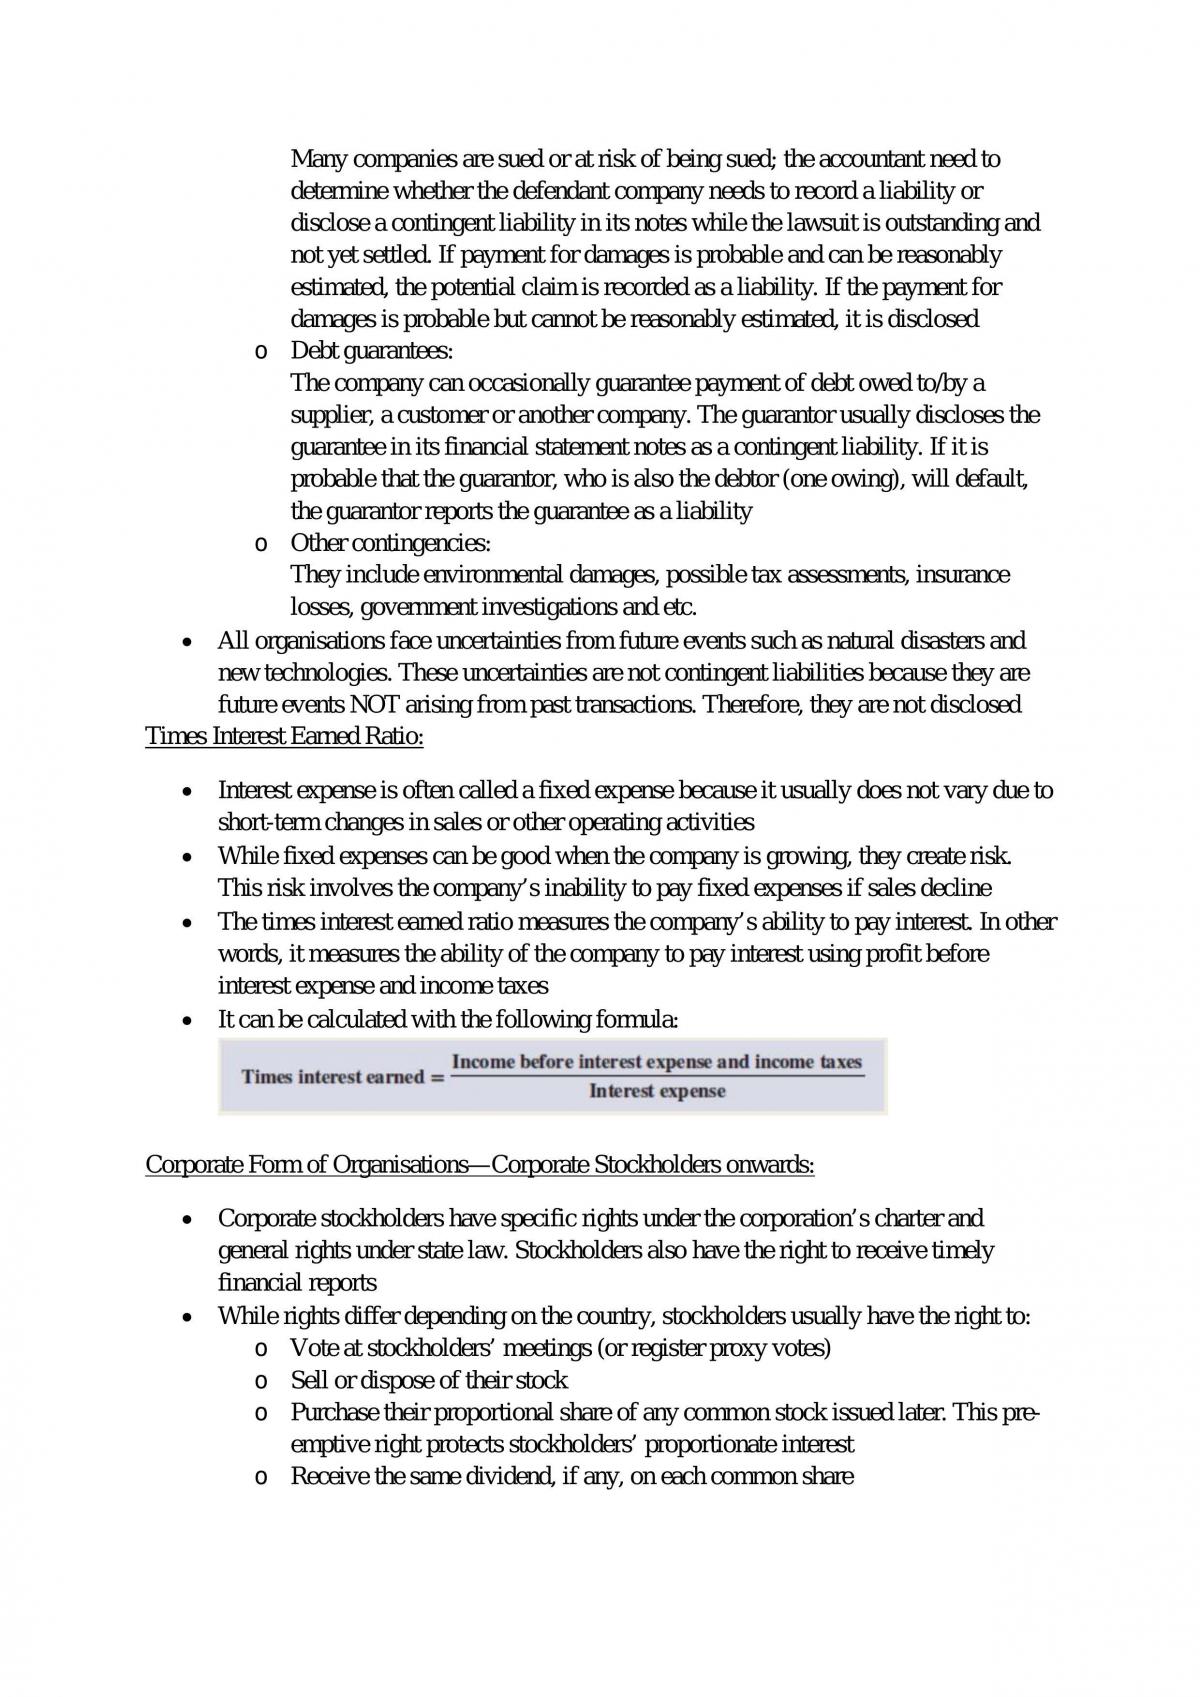 ACC202 Financial and Managerial Accounting Notes - Page 53